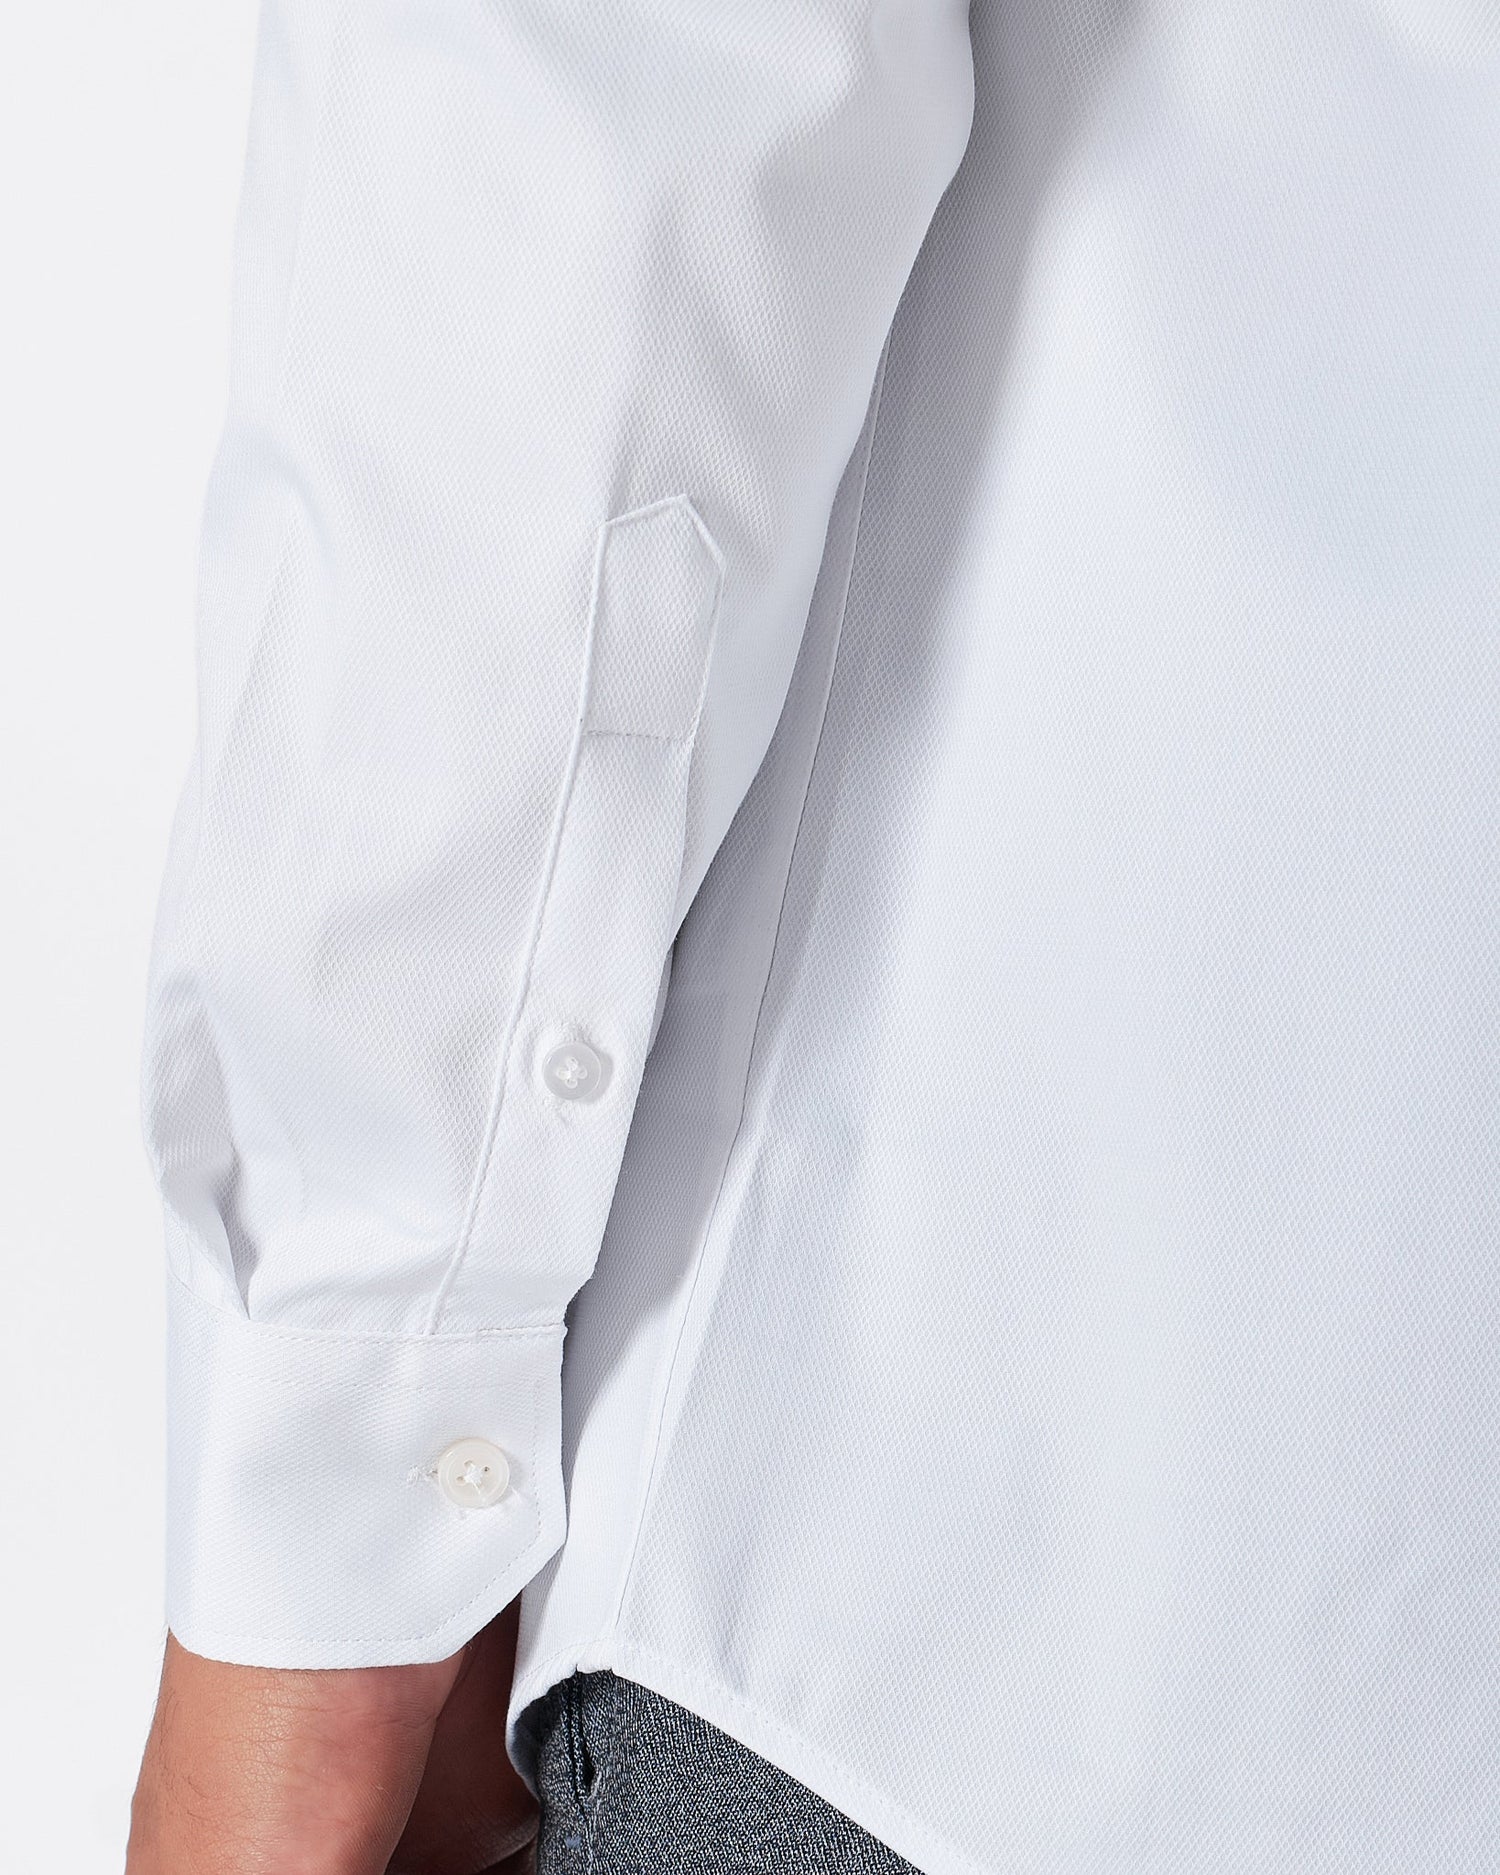 MOI OUTFIT-ABA Slim Fit Men White Shirts Long Sleeve 17.90